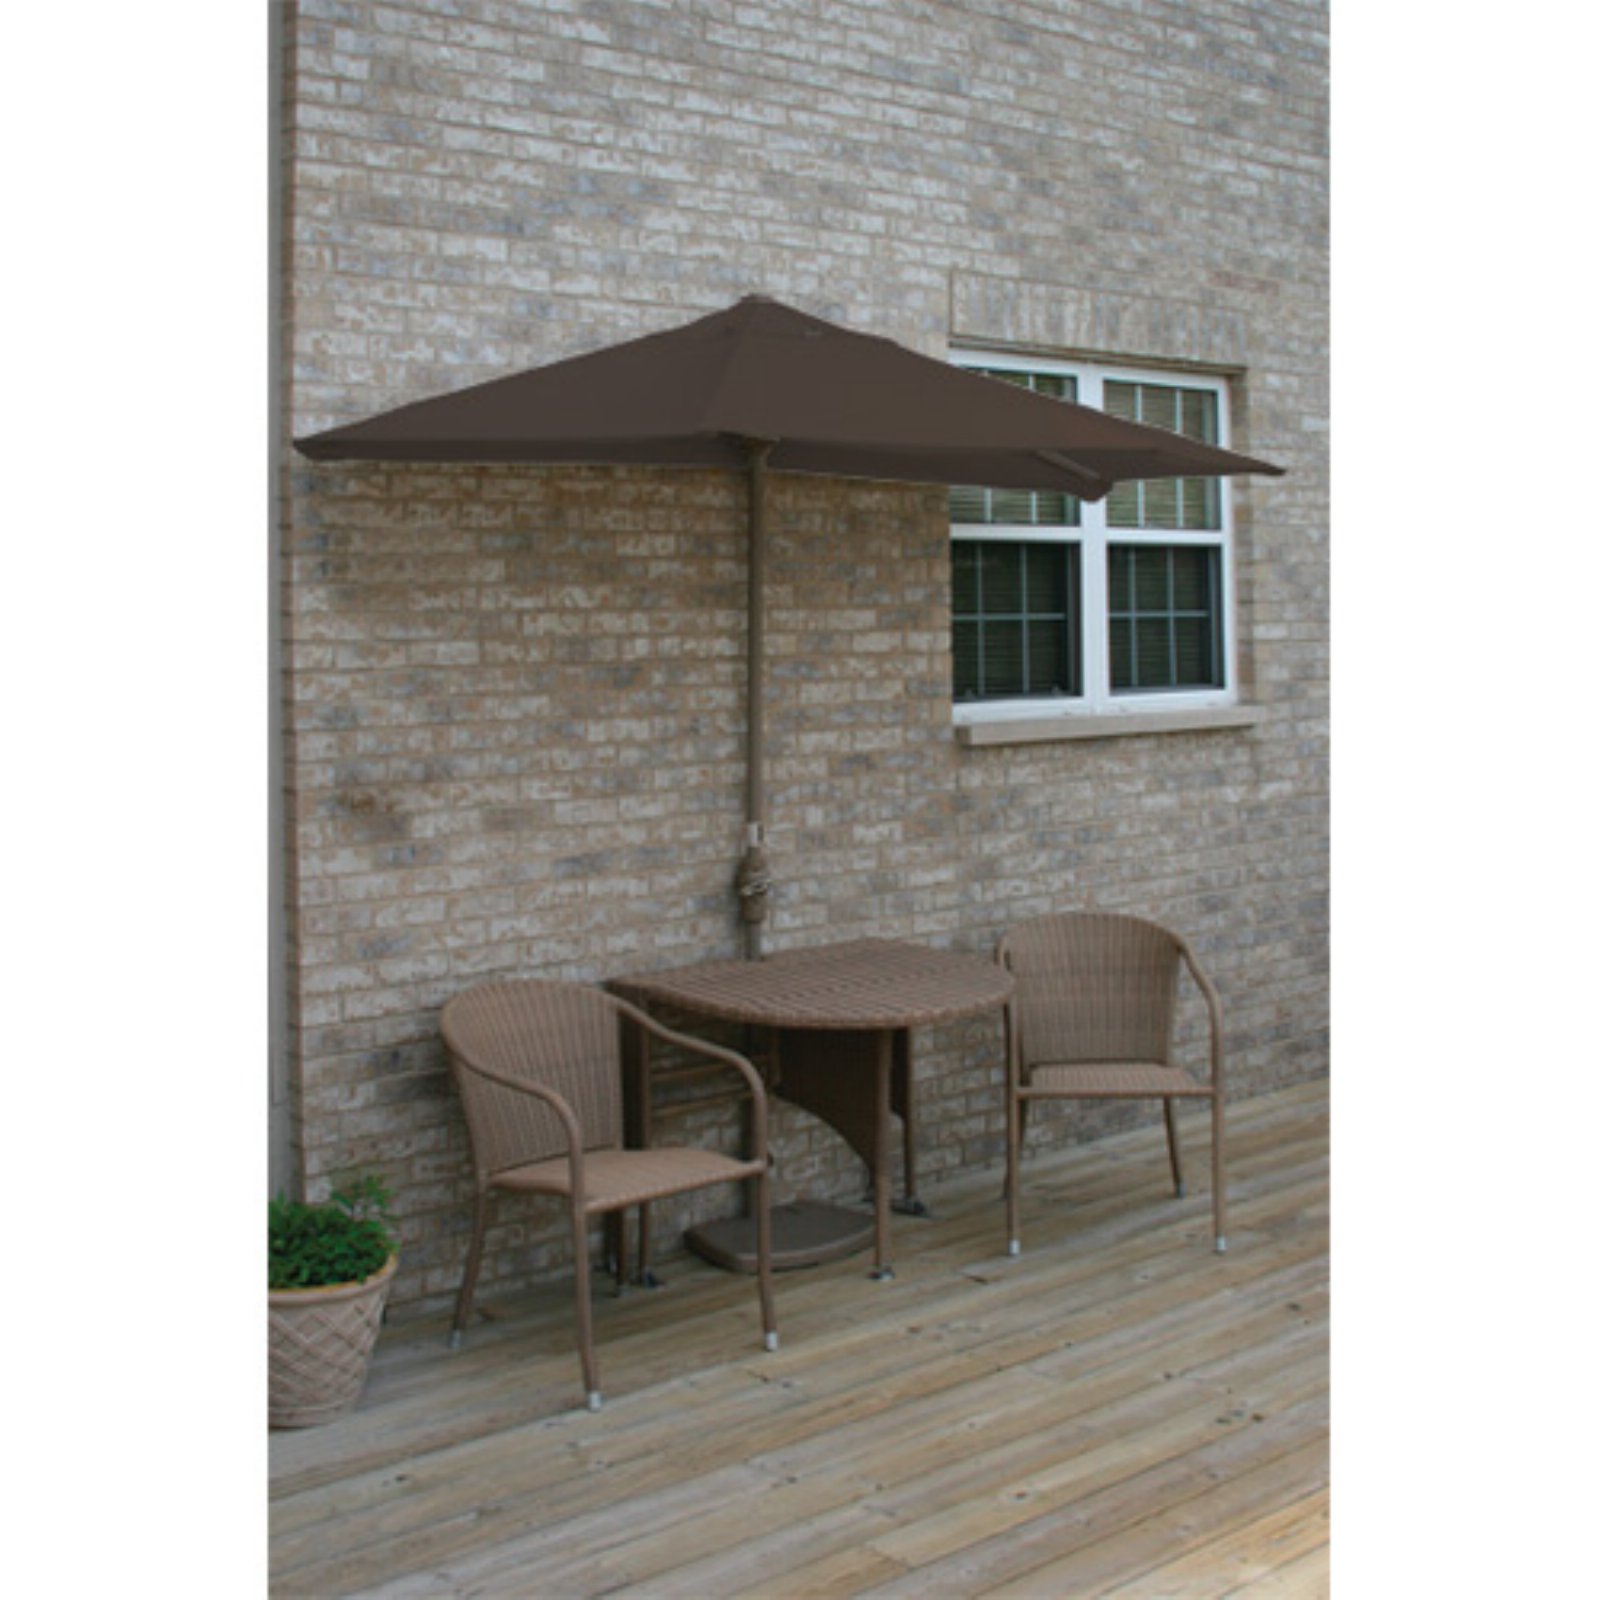 Blue Star Group Terrace Mates Adena All-Weather Wicker Coffee Color Table Set w/ 7.5'-Wide OFF-THE-WALL BRELLA - Chocolate Olefin Canopy - image 1 of 9